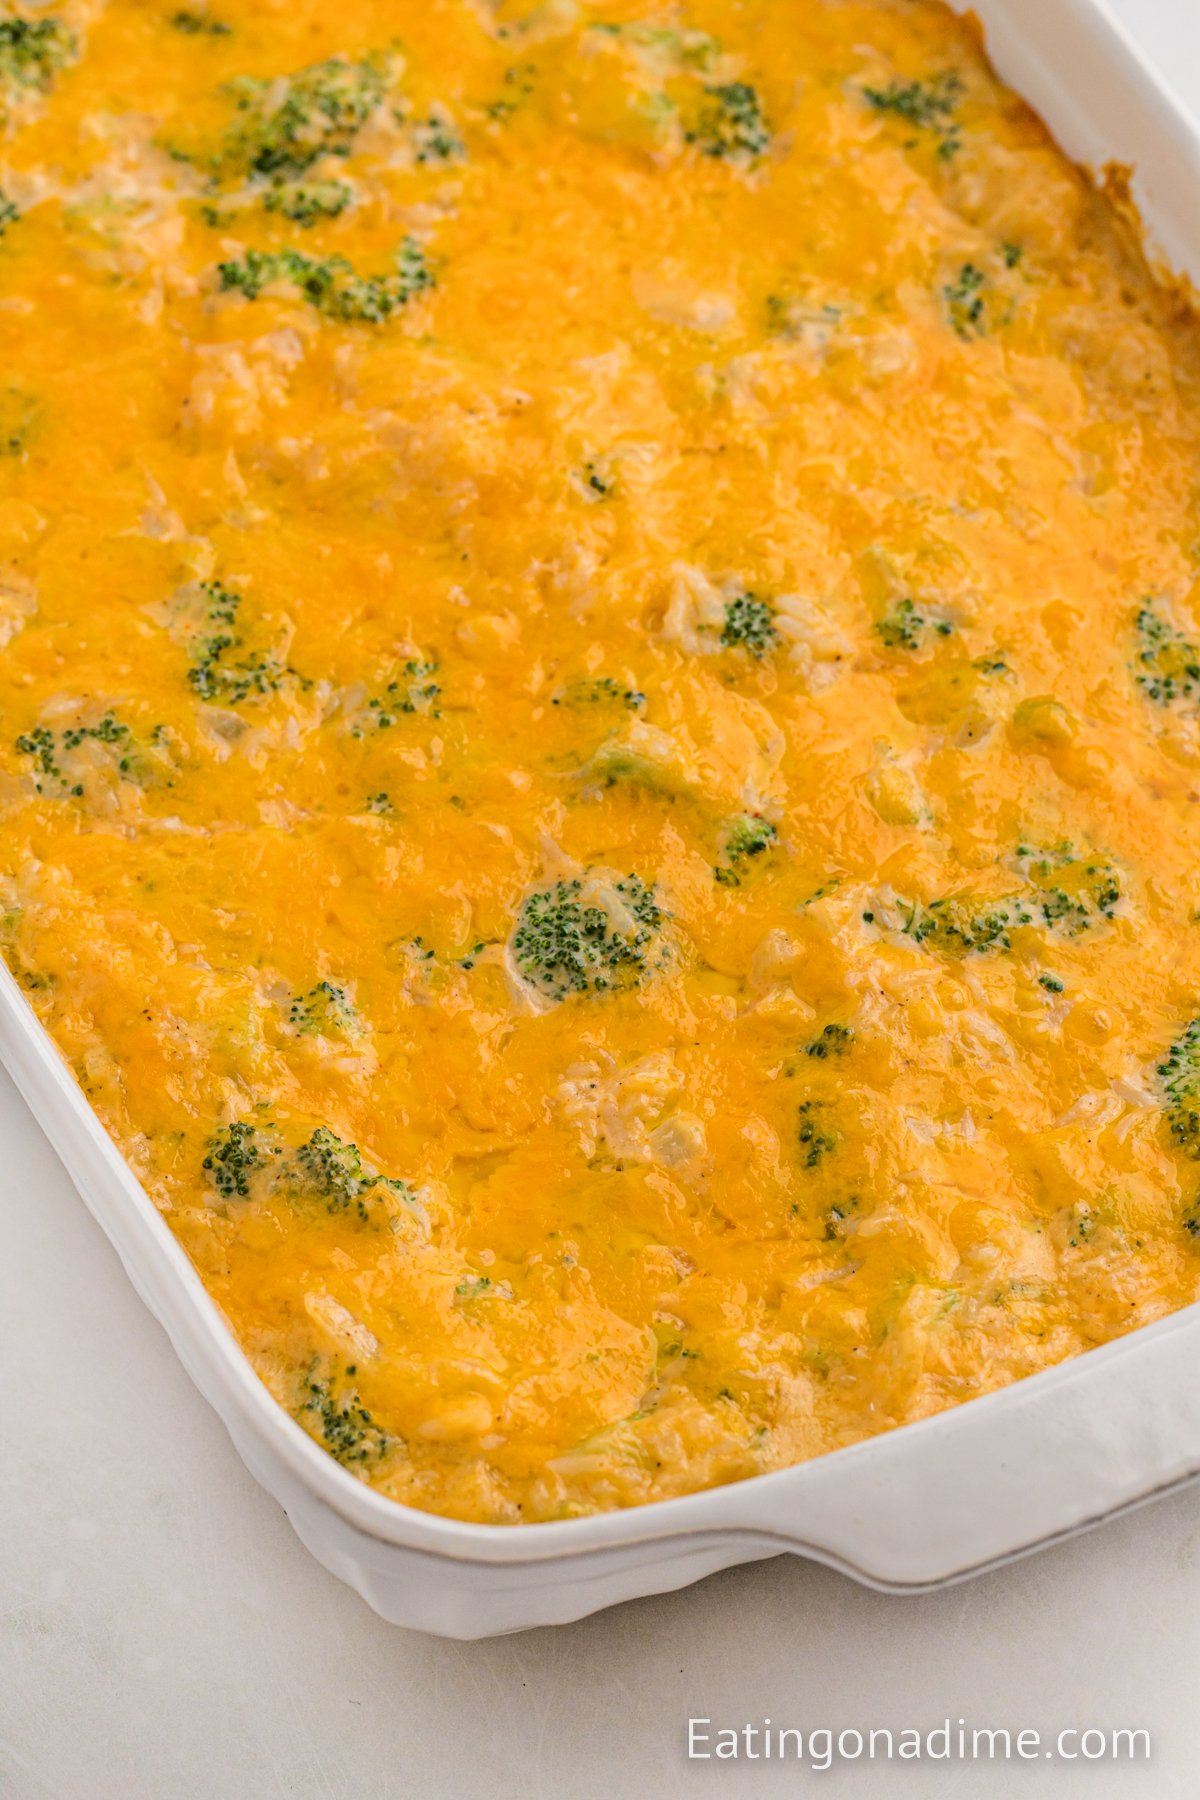 Broccoli and rice casserole in a baking dish